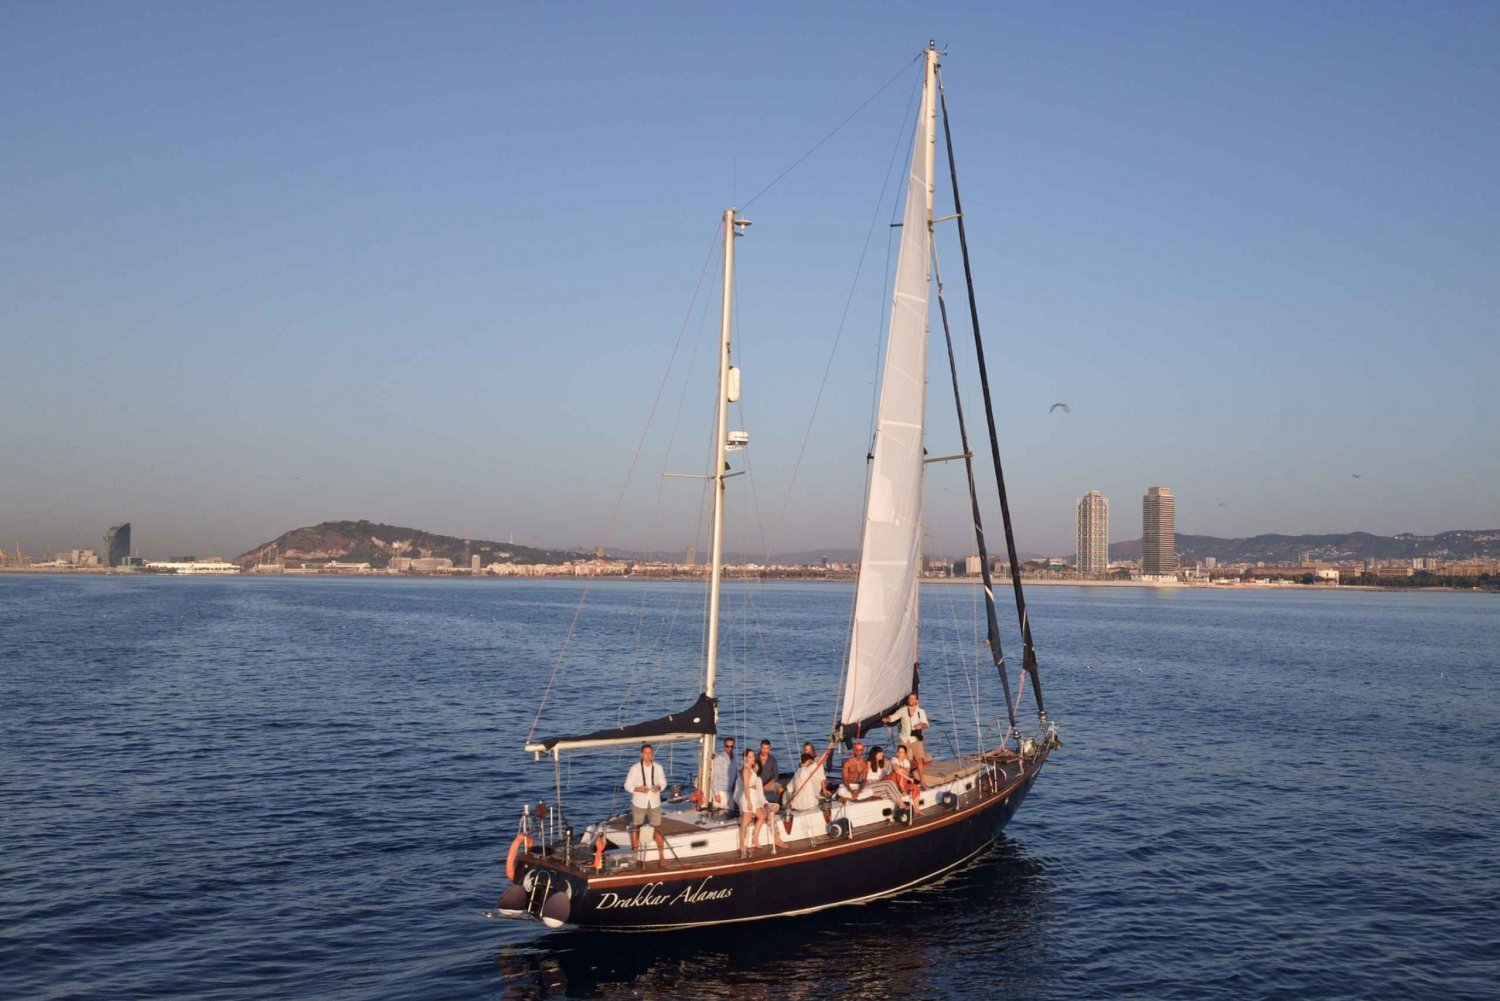 Barcelona: Sunset and Midday Sailing on a Classic Ketch Boat